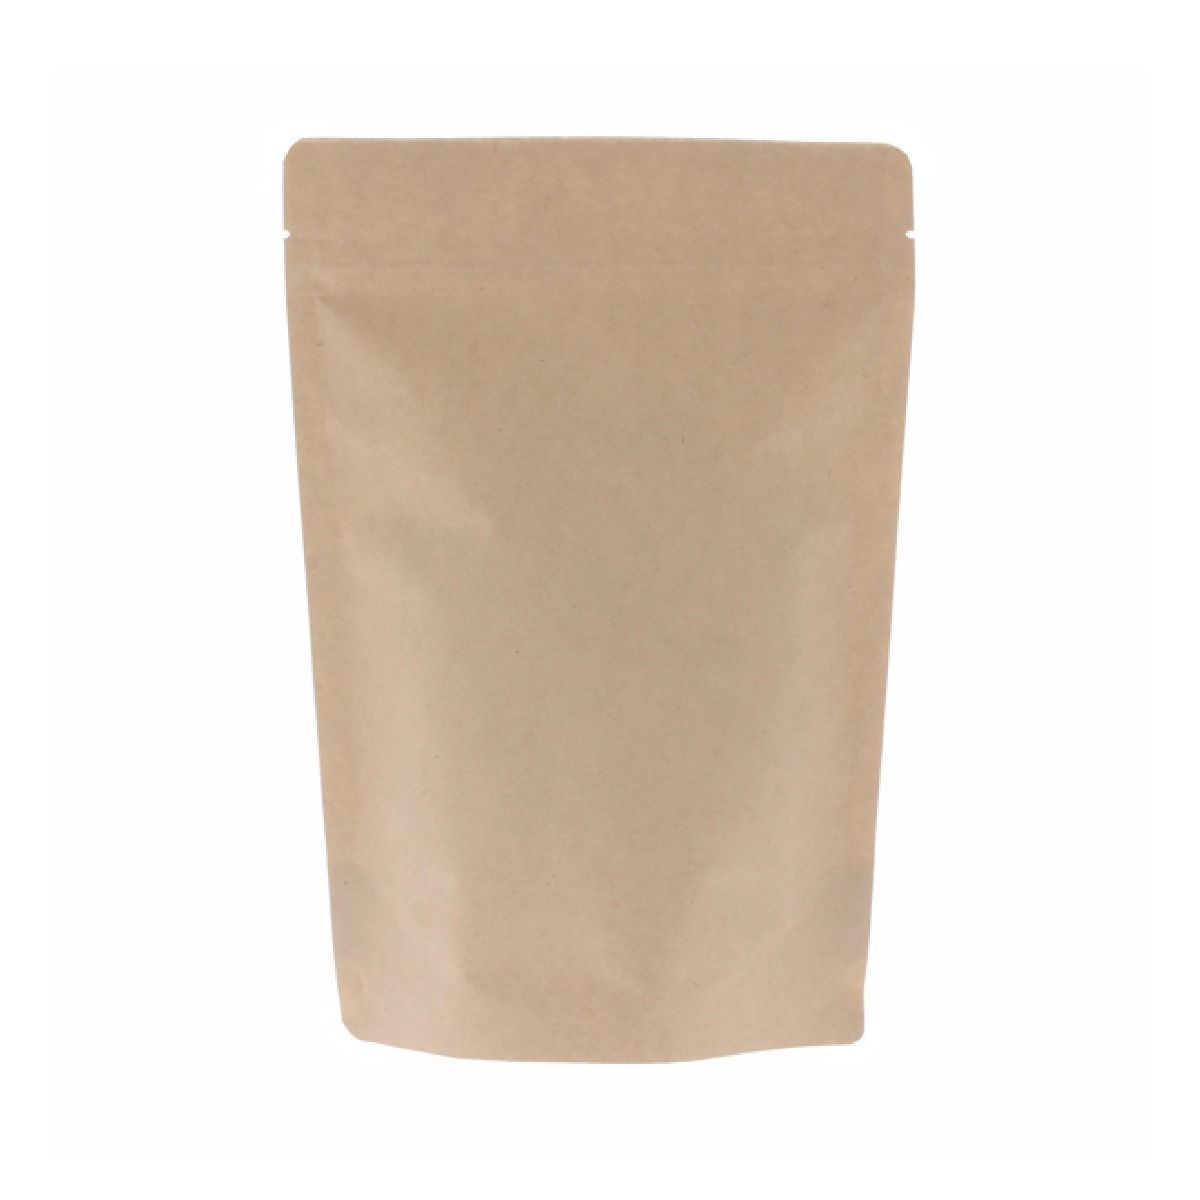 Stand-up pouch brown kraft paper (2-layers)